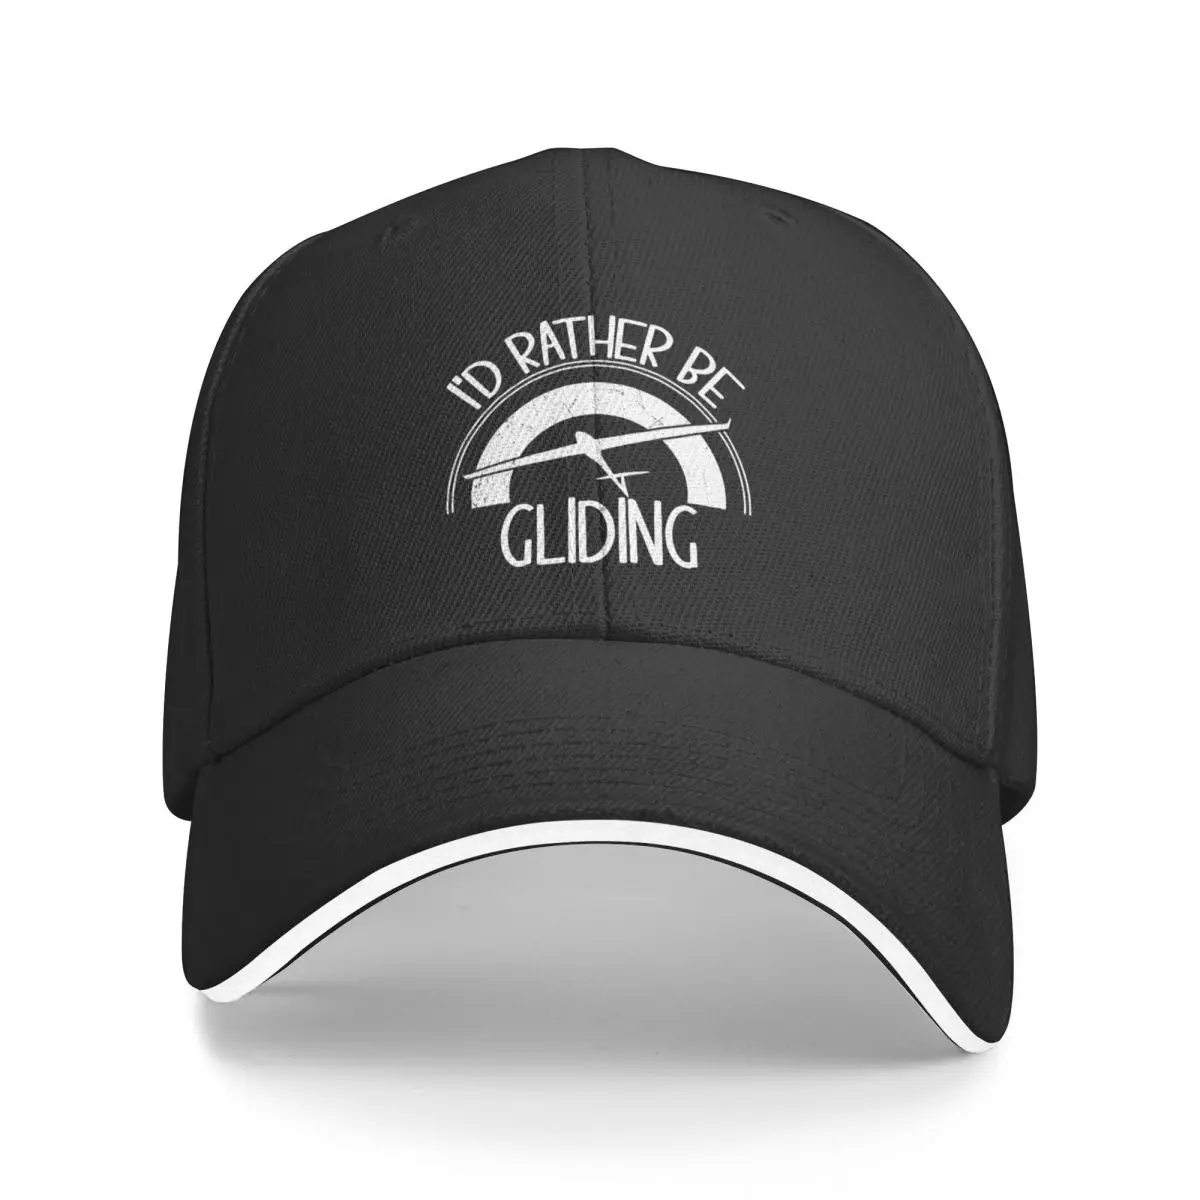 

Id Rather Be Gliding-Funny Gliding Saying-Funny Gift For Gliding Lover Baseball Cap |-F-| Cosplay hiking hat Girl'S Hats Men's